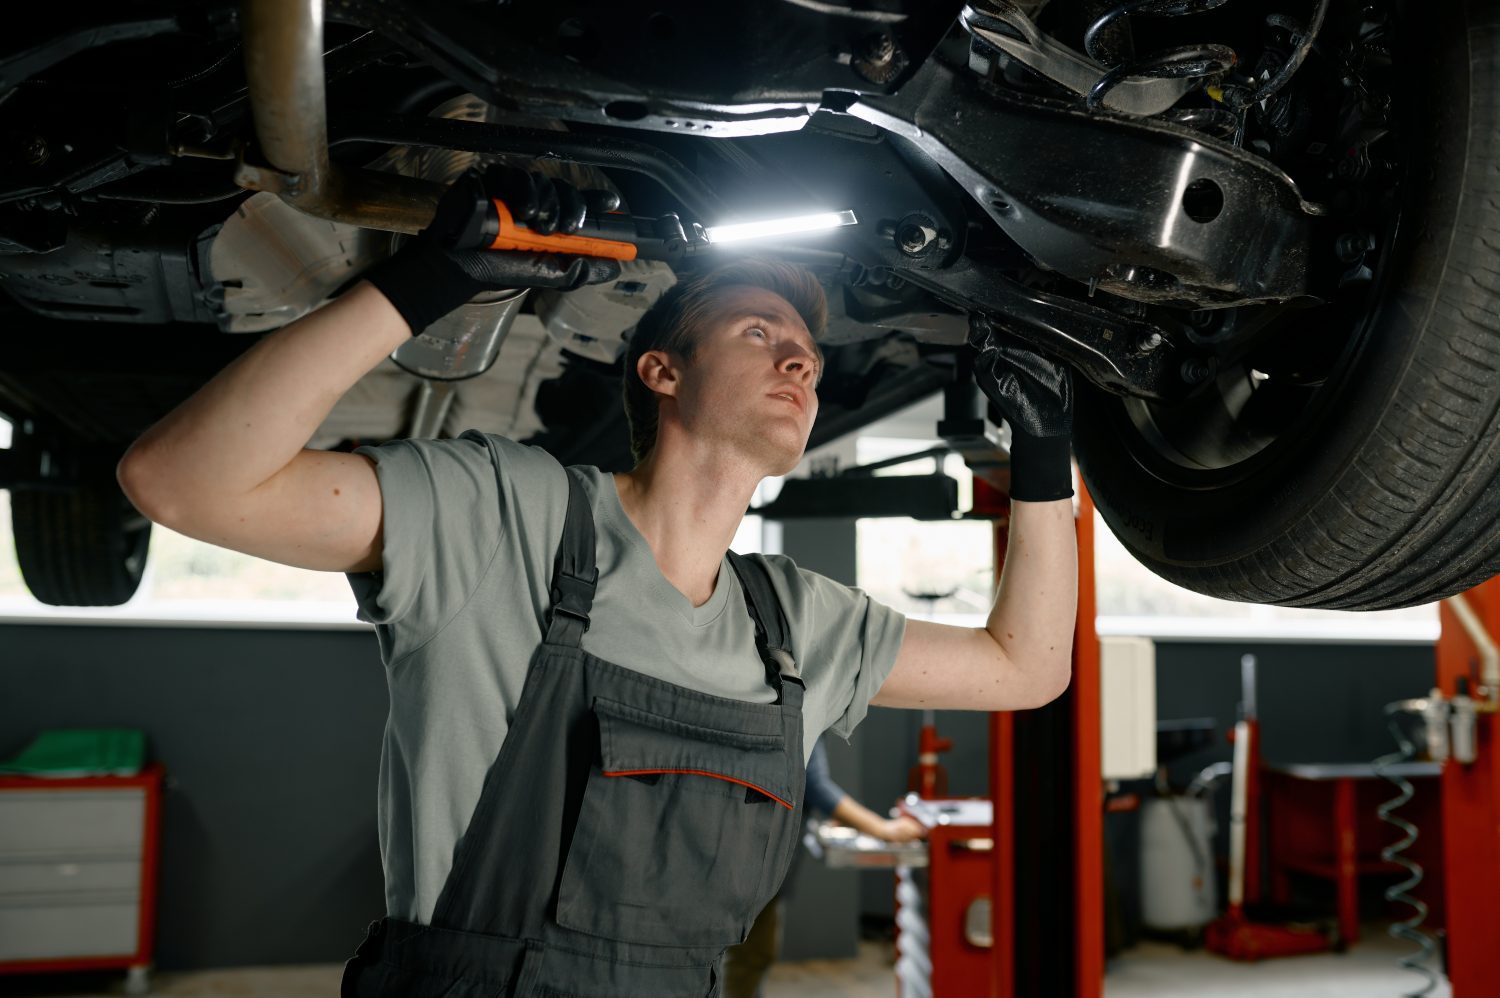 Why are so many auto technicians leaving, and how can this be fixed? The answer starts with proper onboarding procedures.